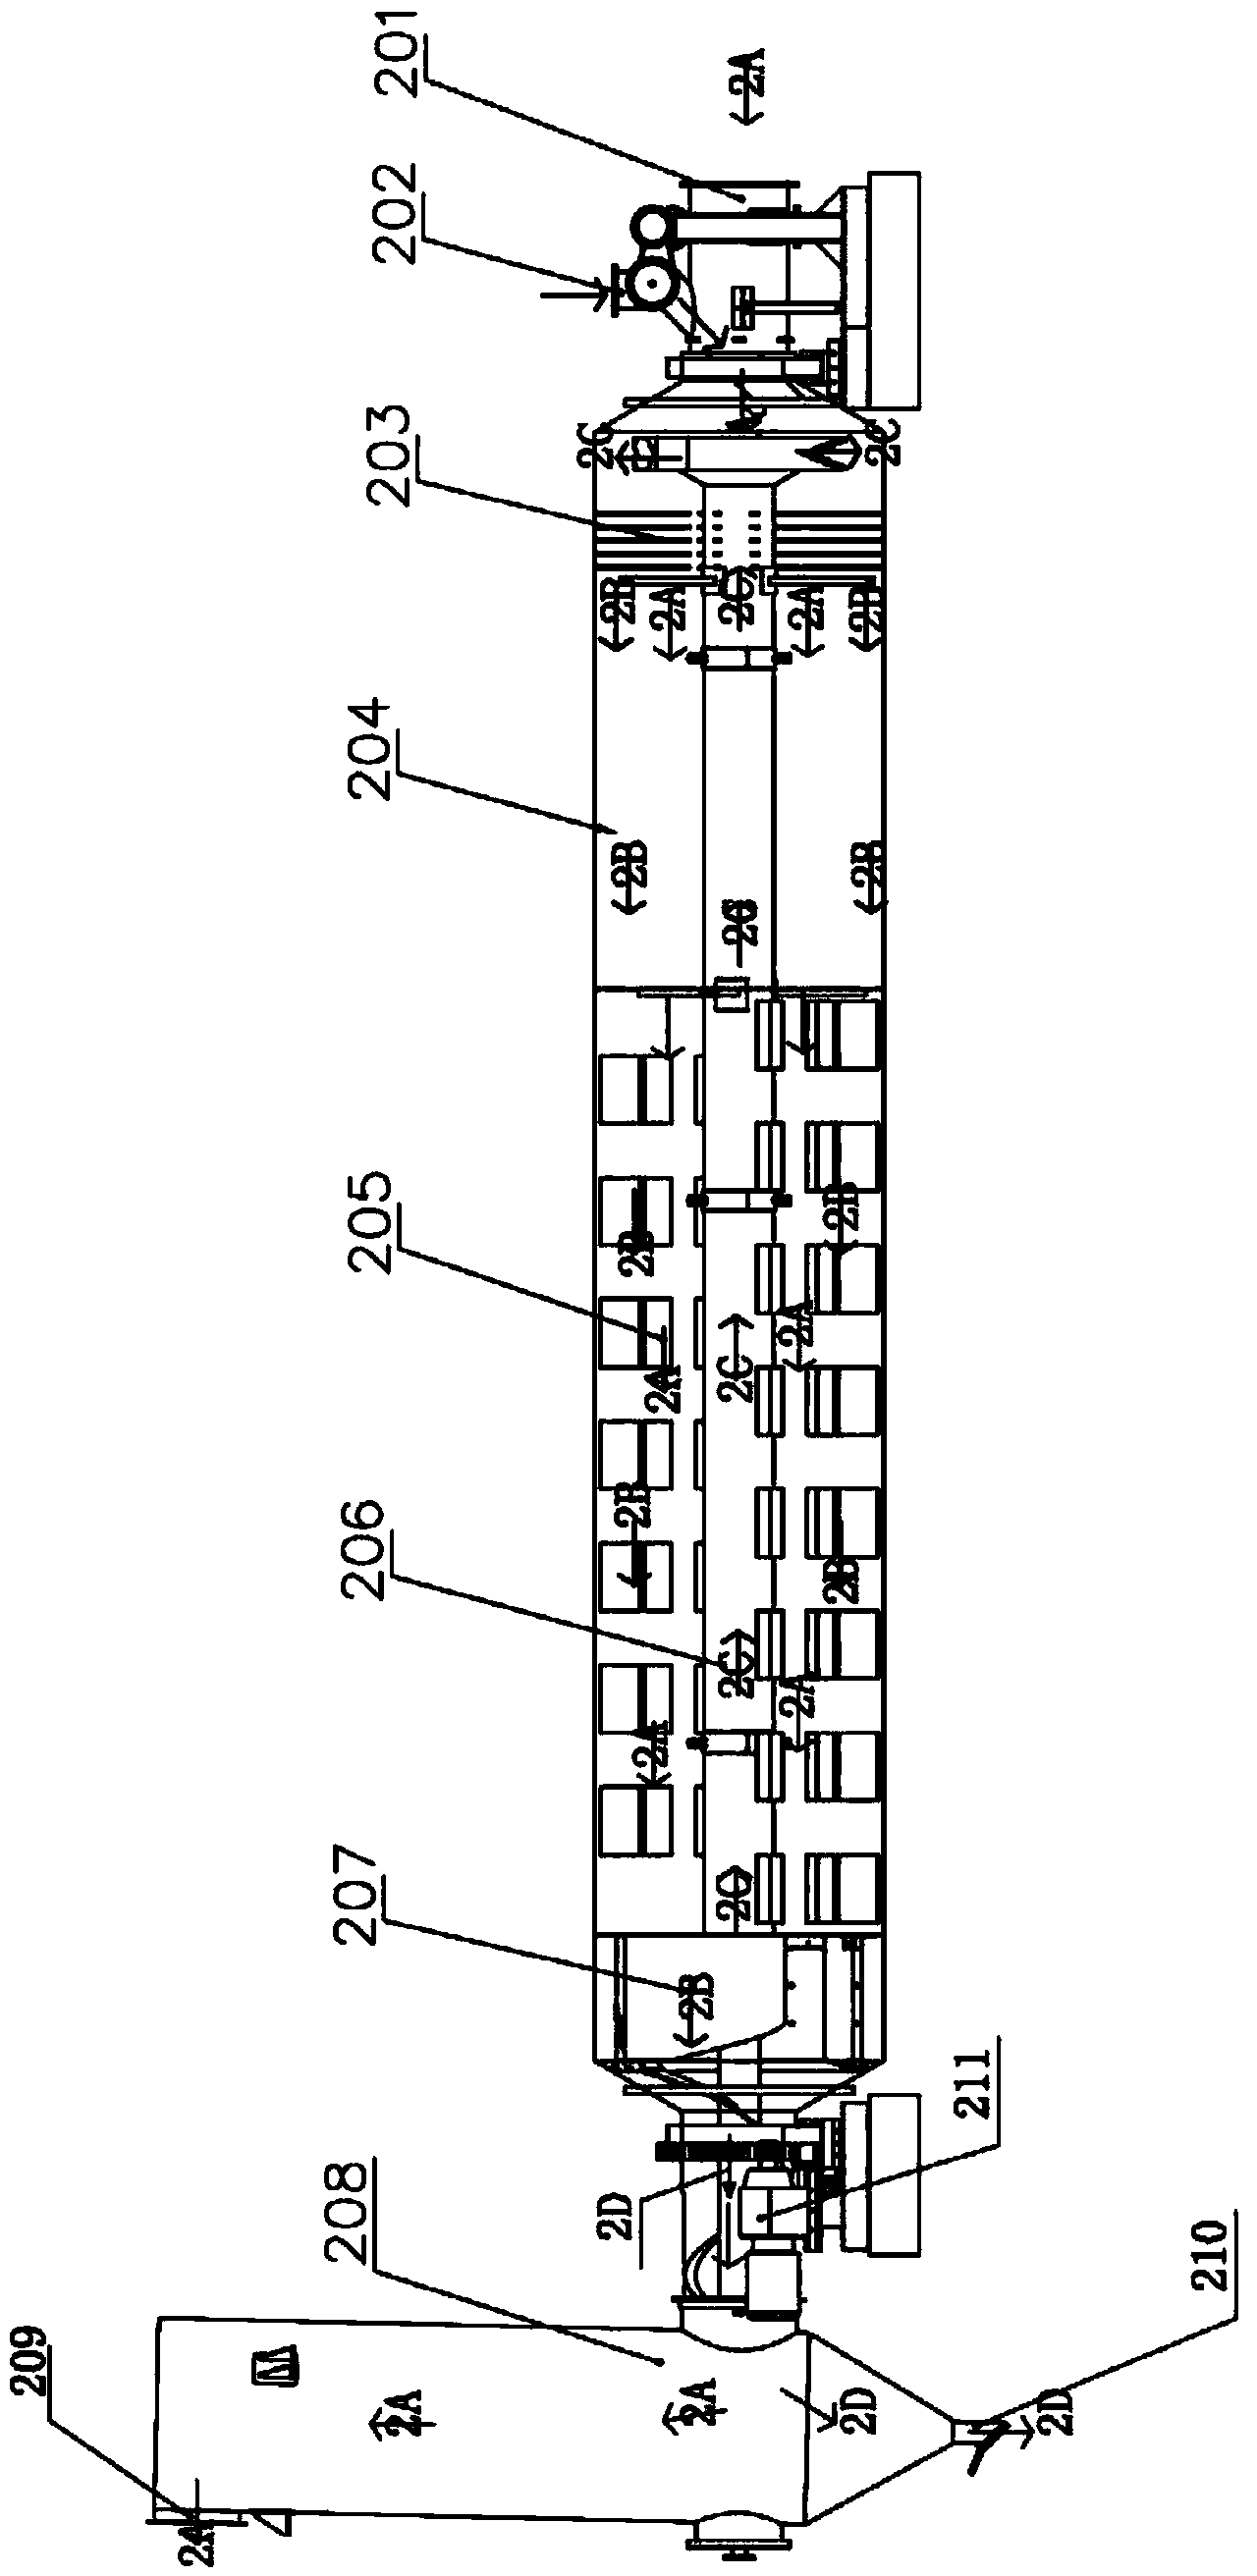 Household garbage treatment system and method